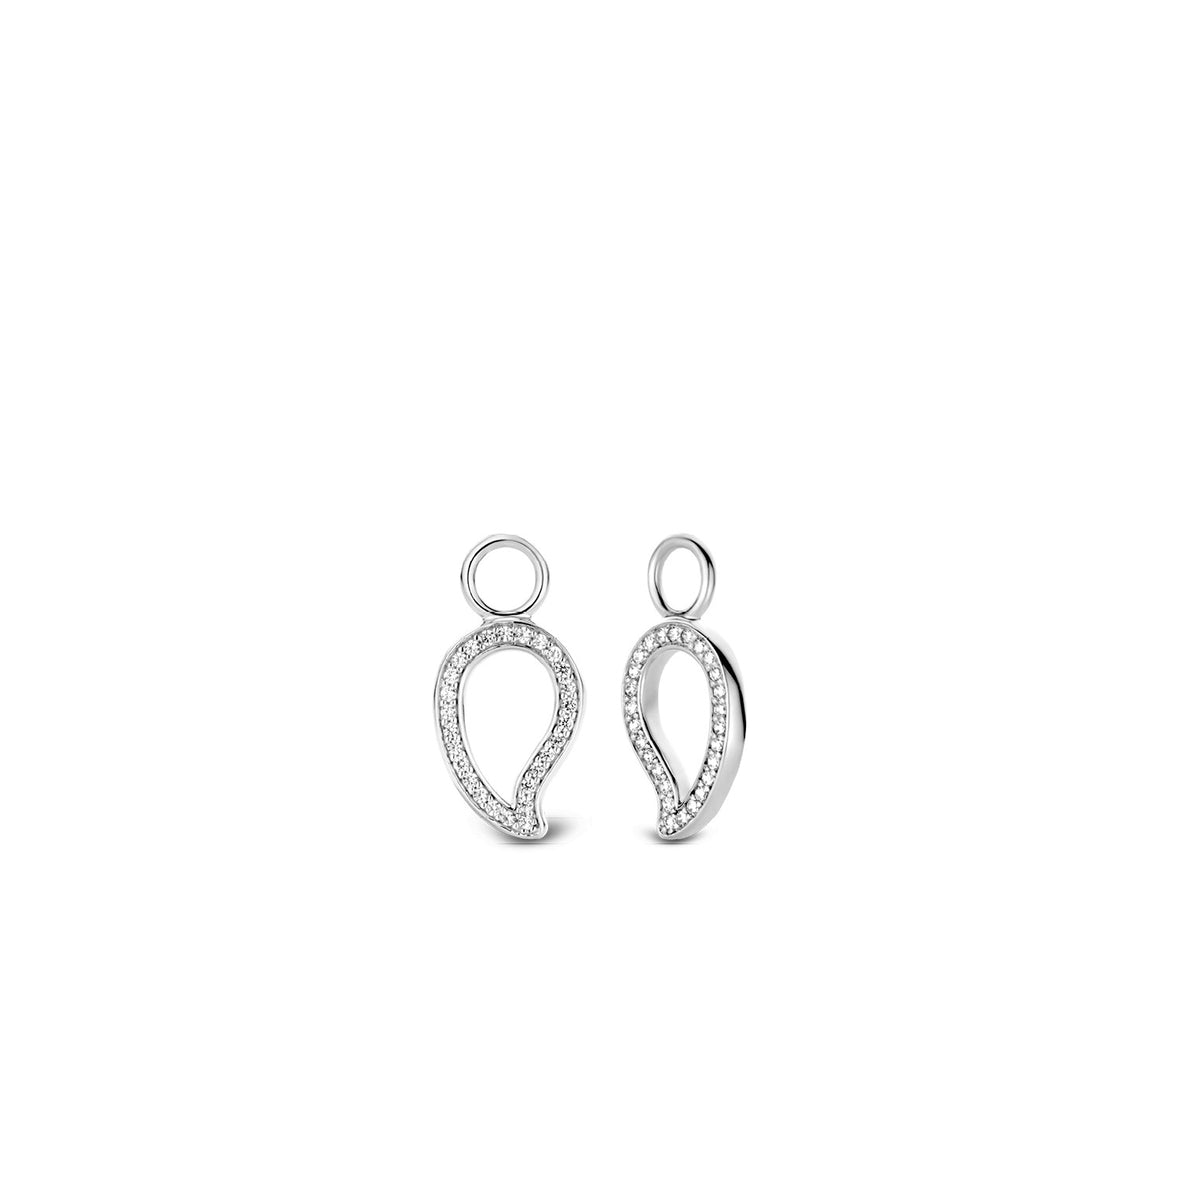 TI SENTO Sterling Silver and Cubic Zirconia Paisley Ear Charm